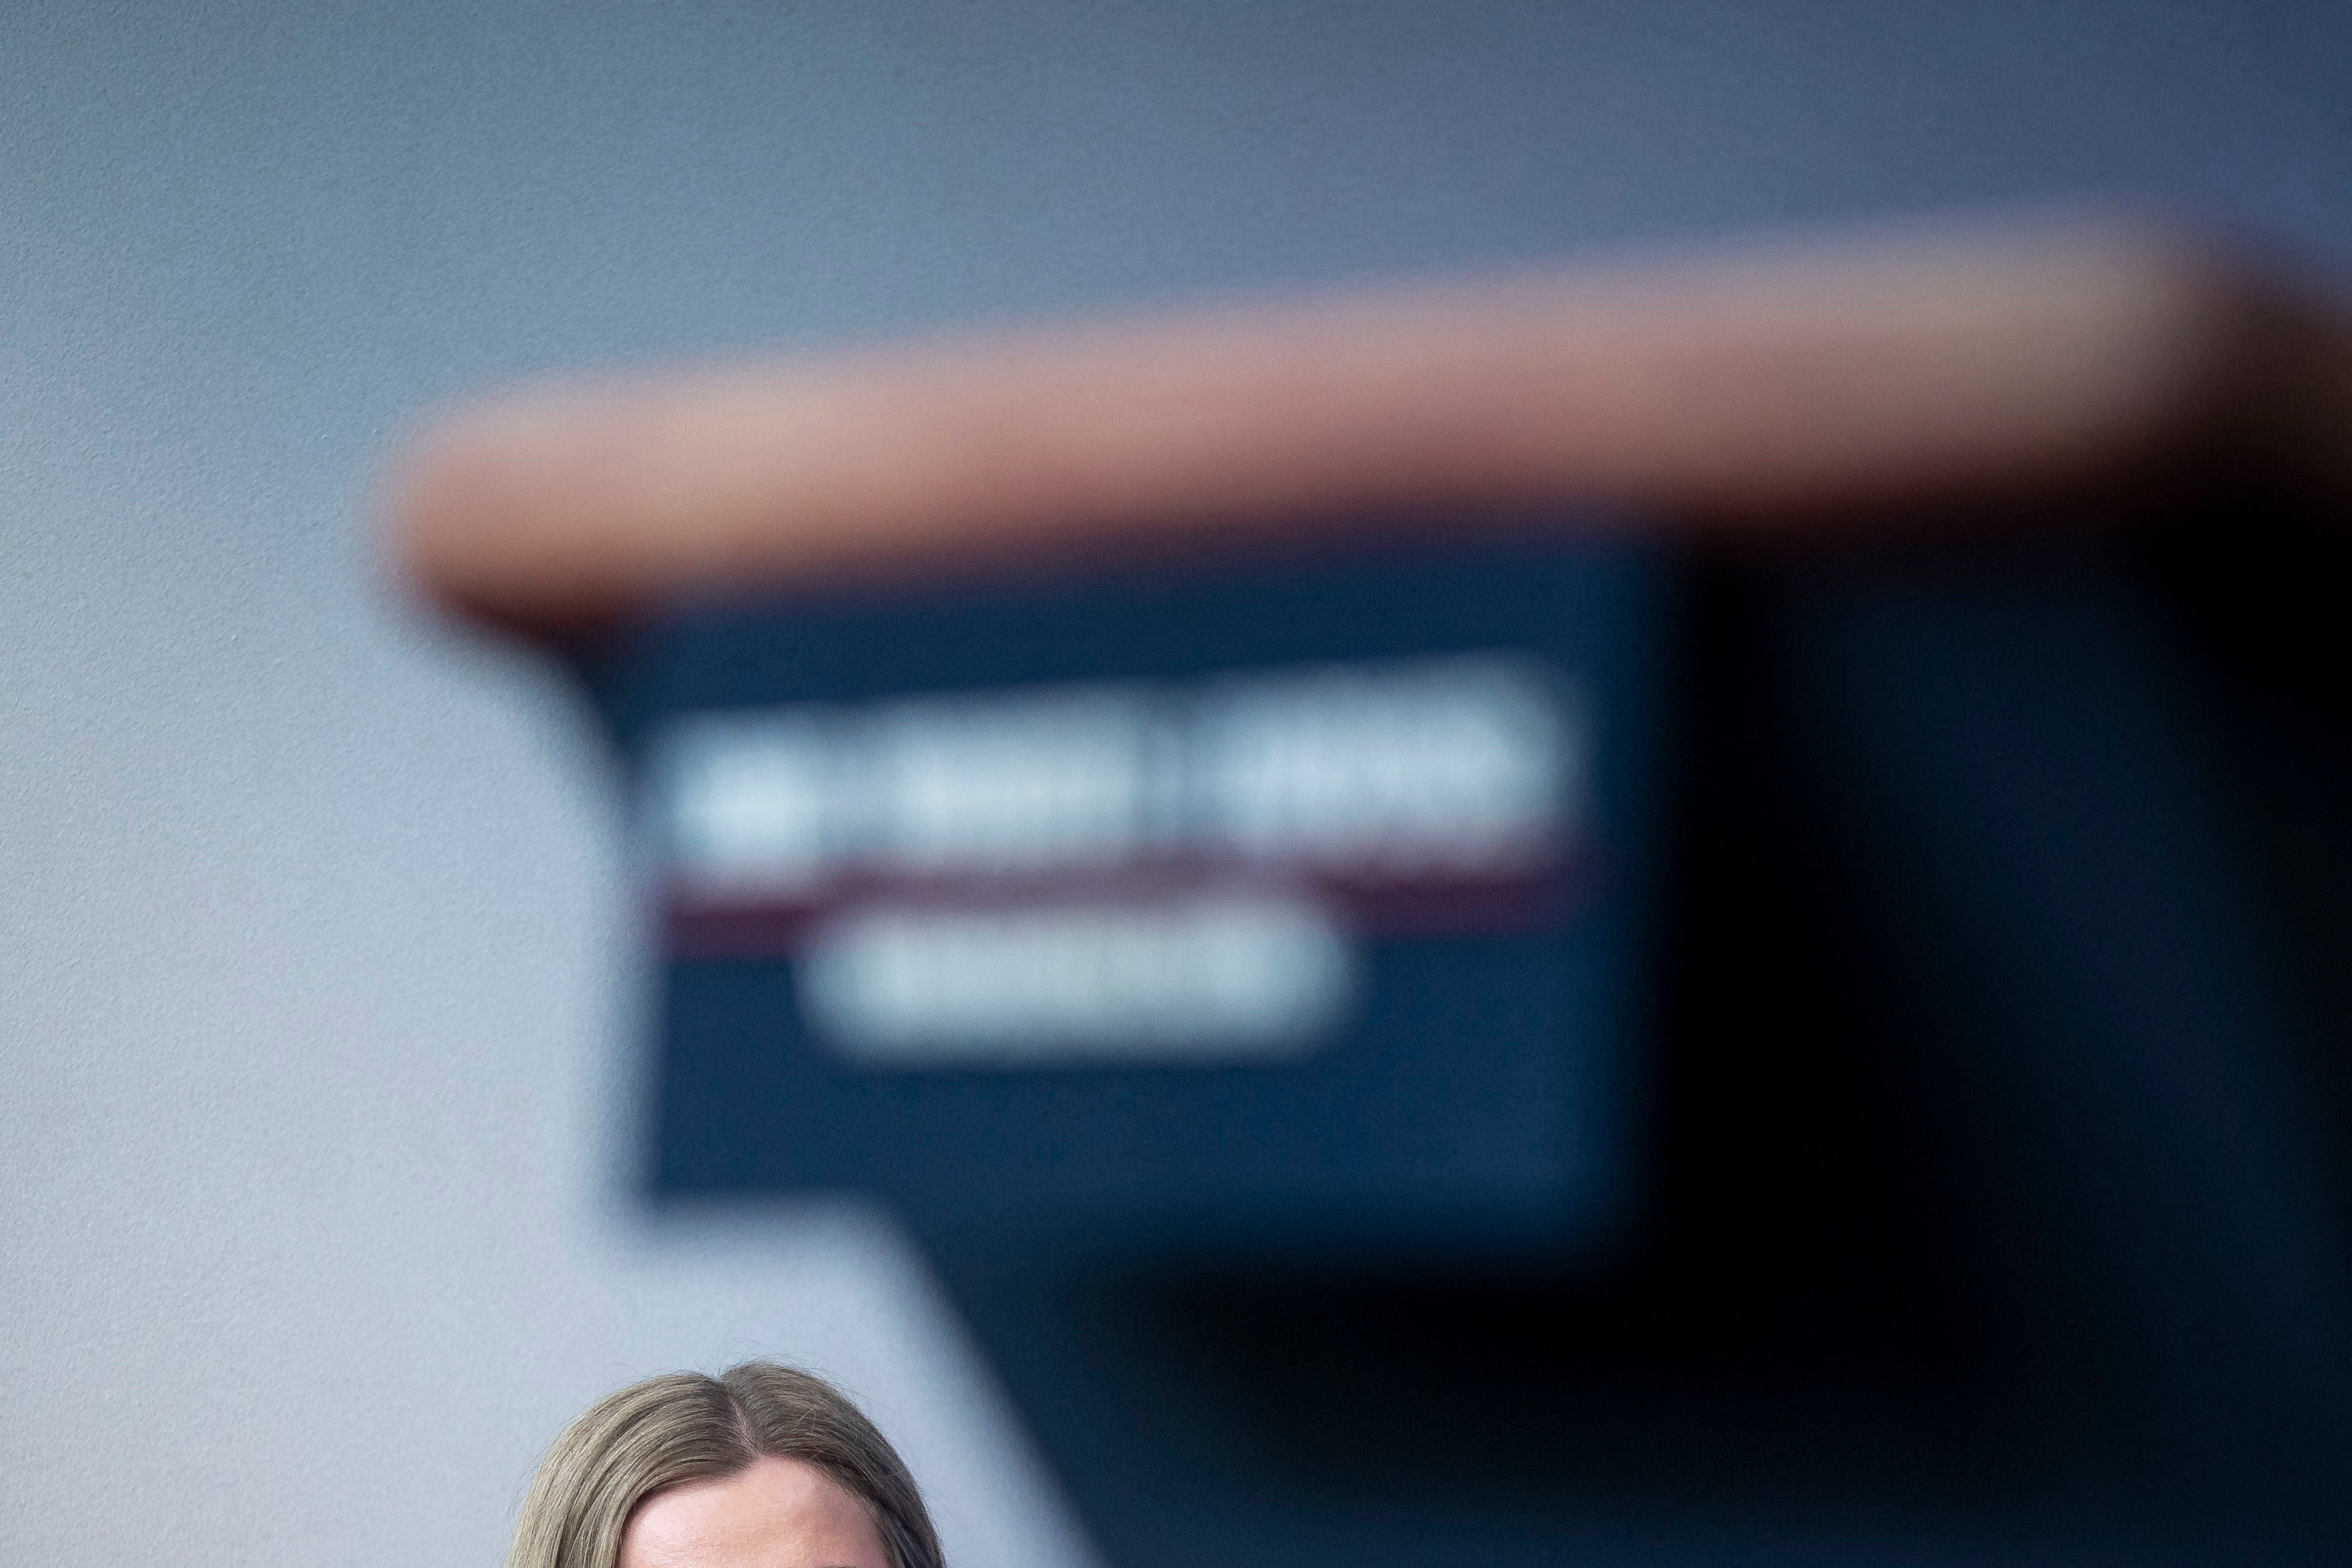 Sarah Matthews, a former White House deputy press secretary, sits and listens to a briefing in 2020.